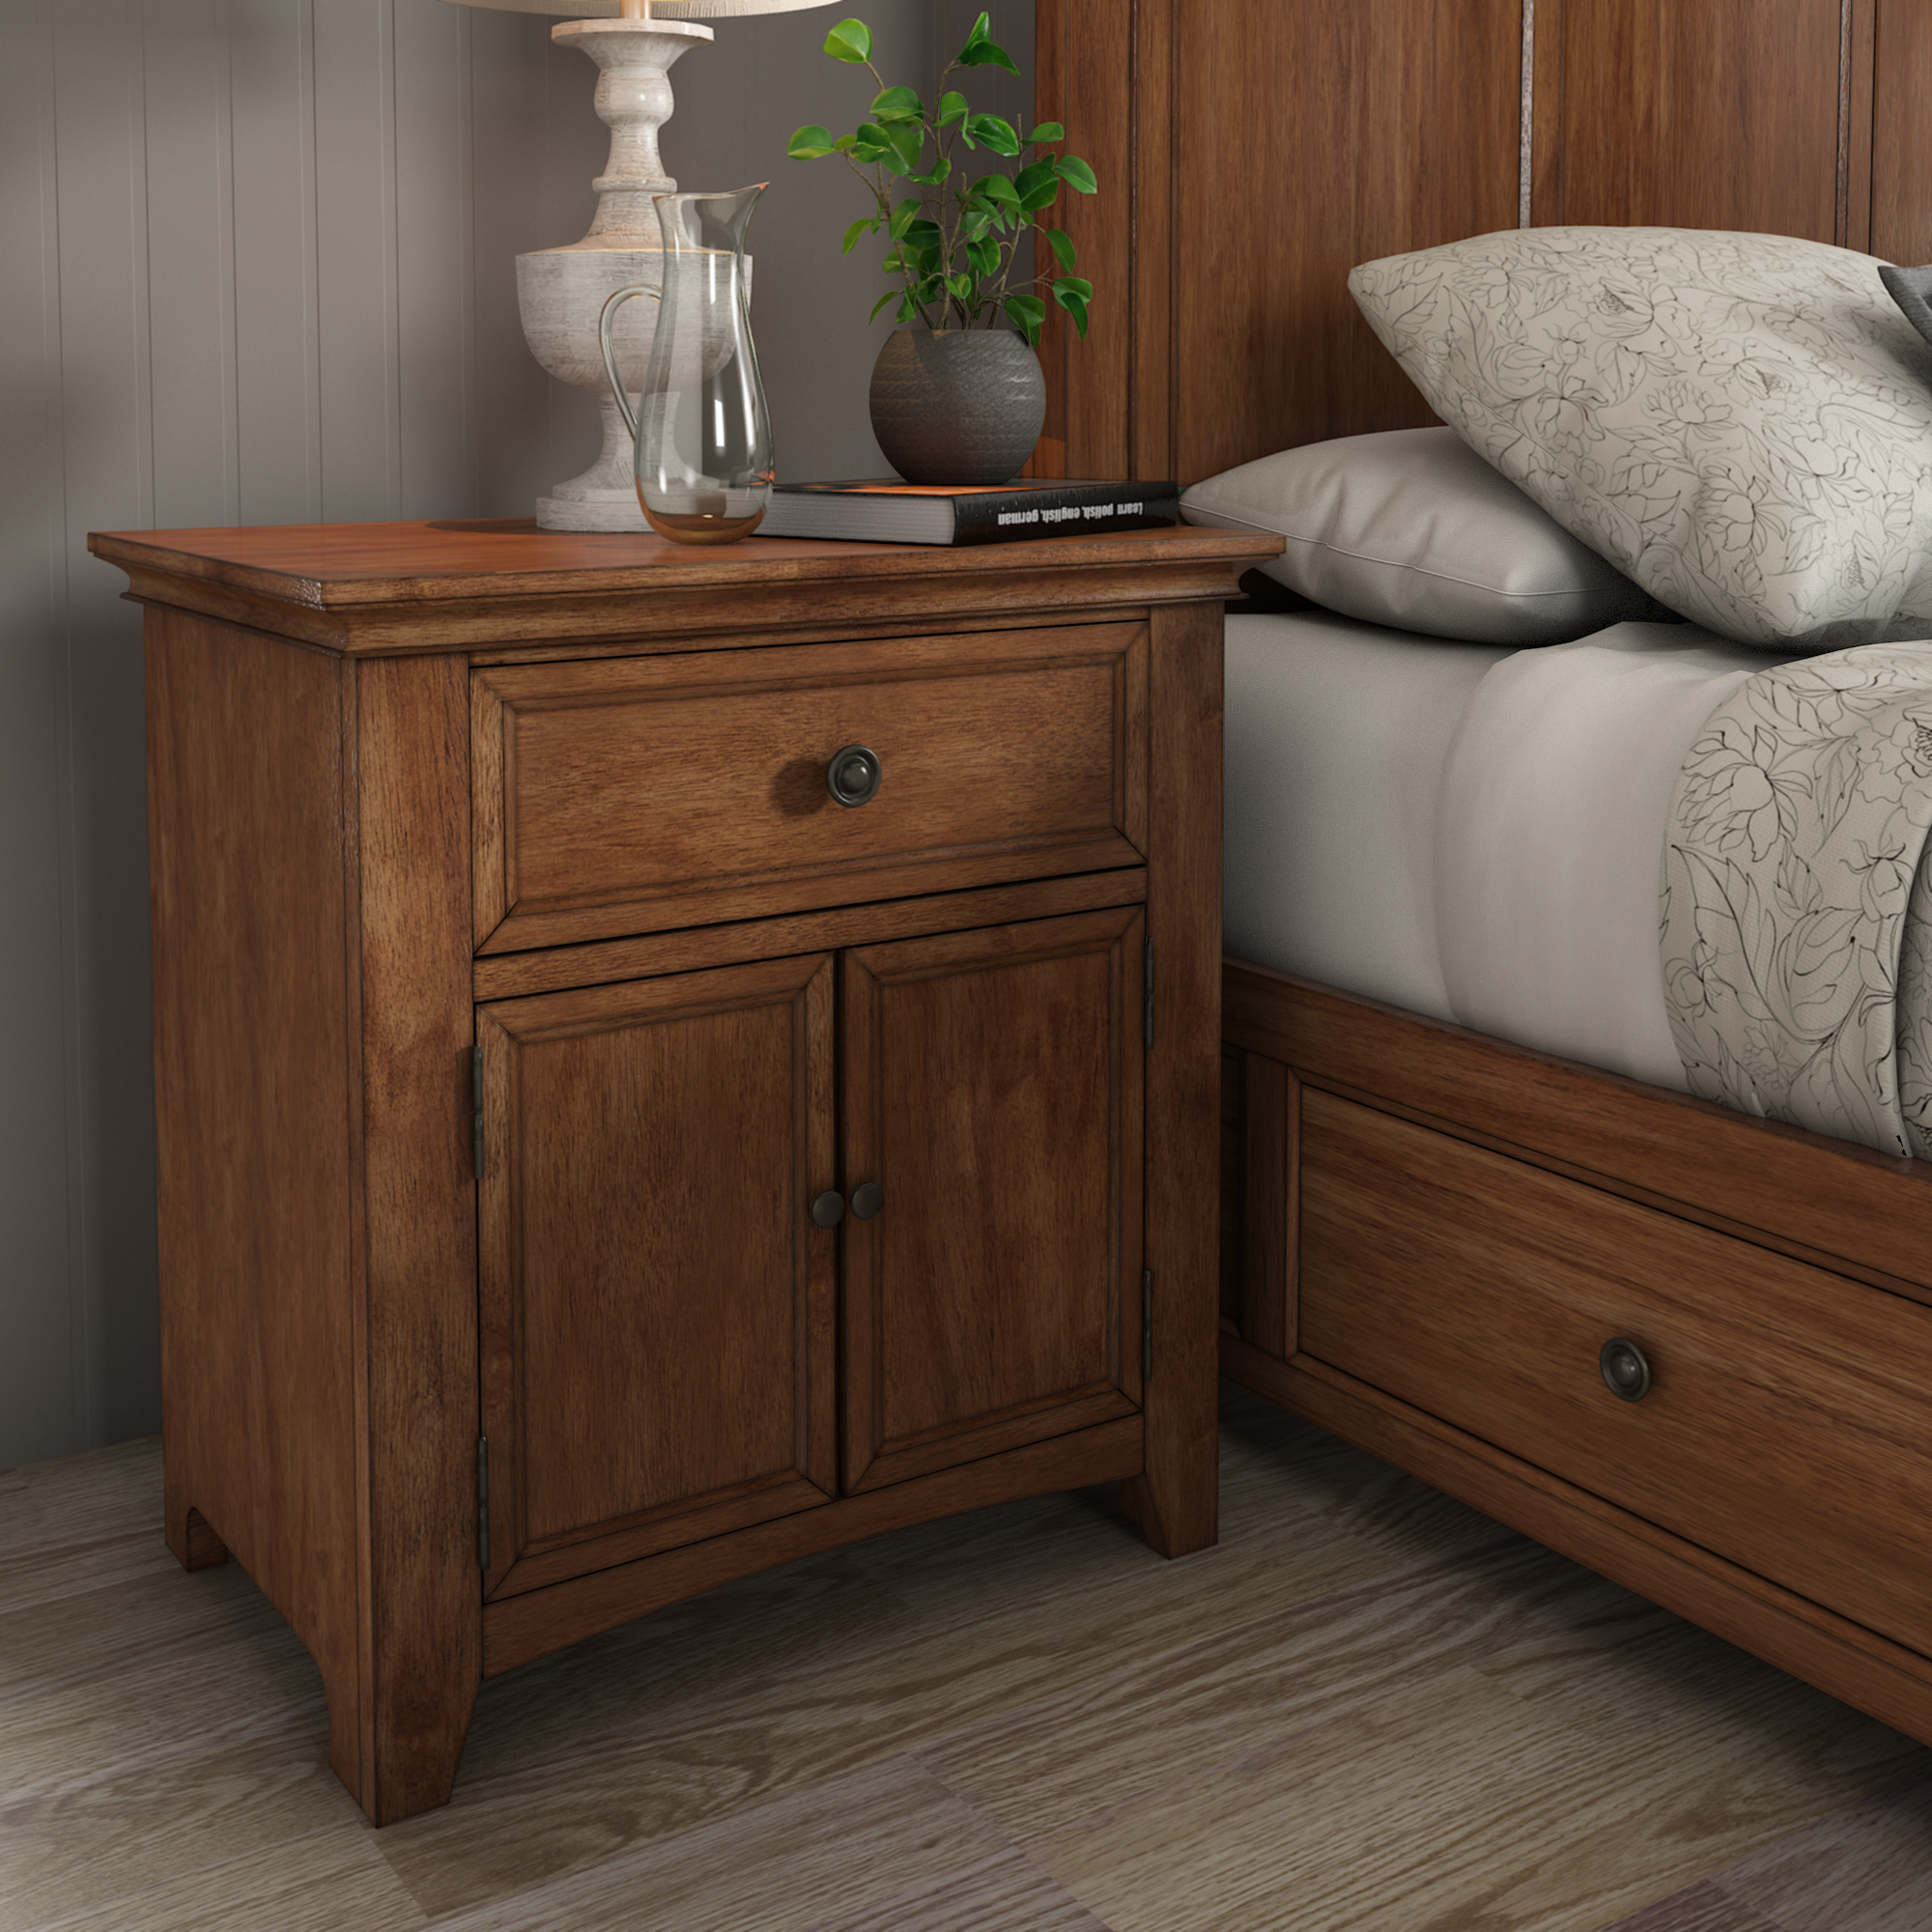 1-Drawer Wood Cupboard Nightstand with Charging Station